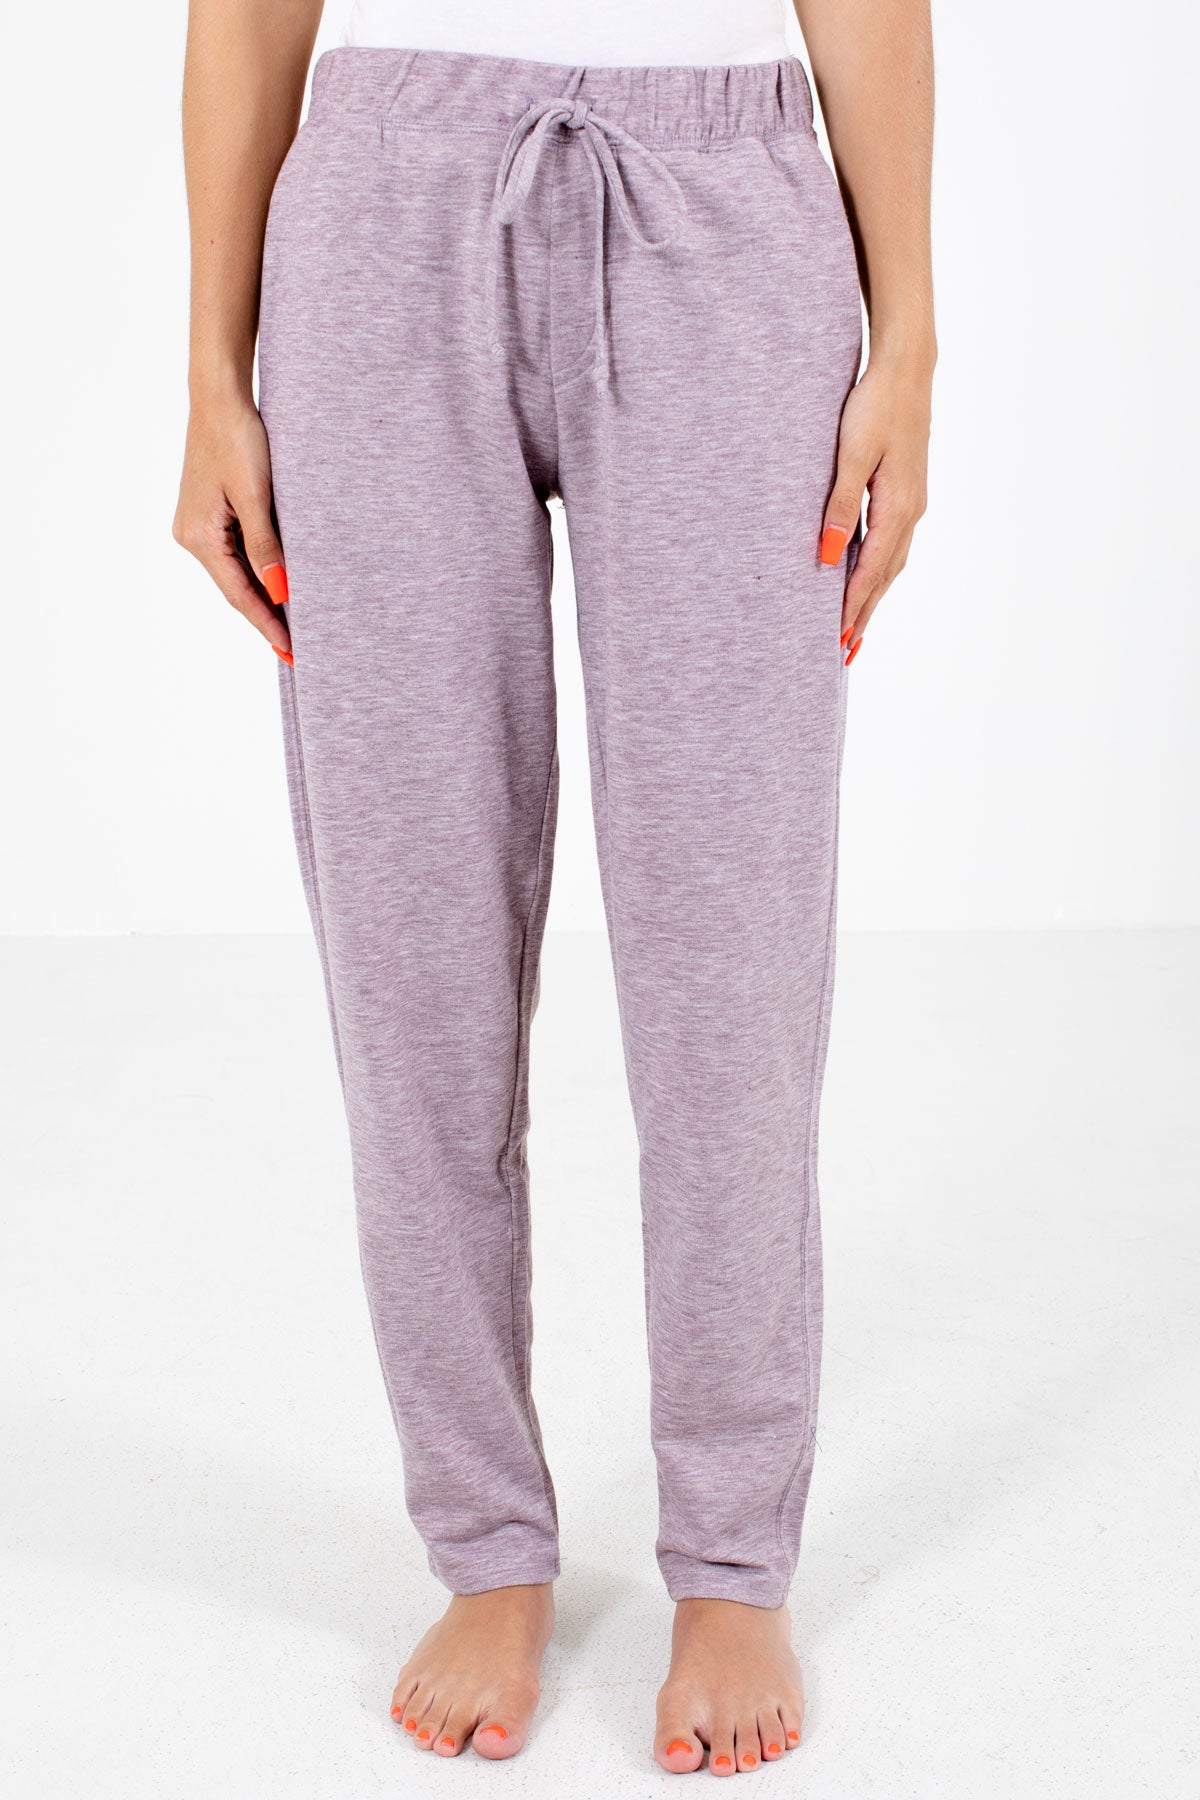 No Place to Go Lounge Pants